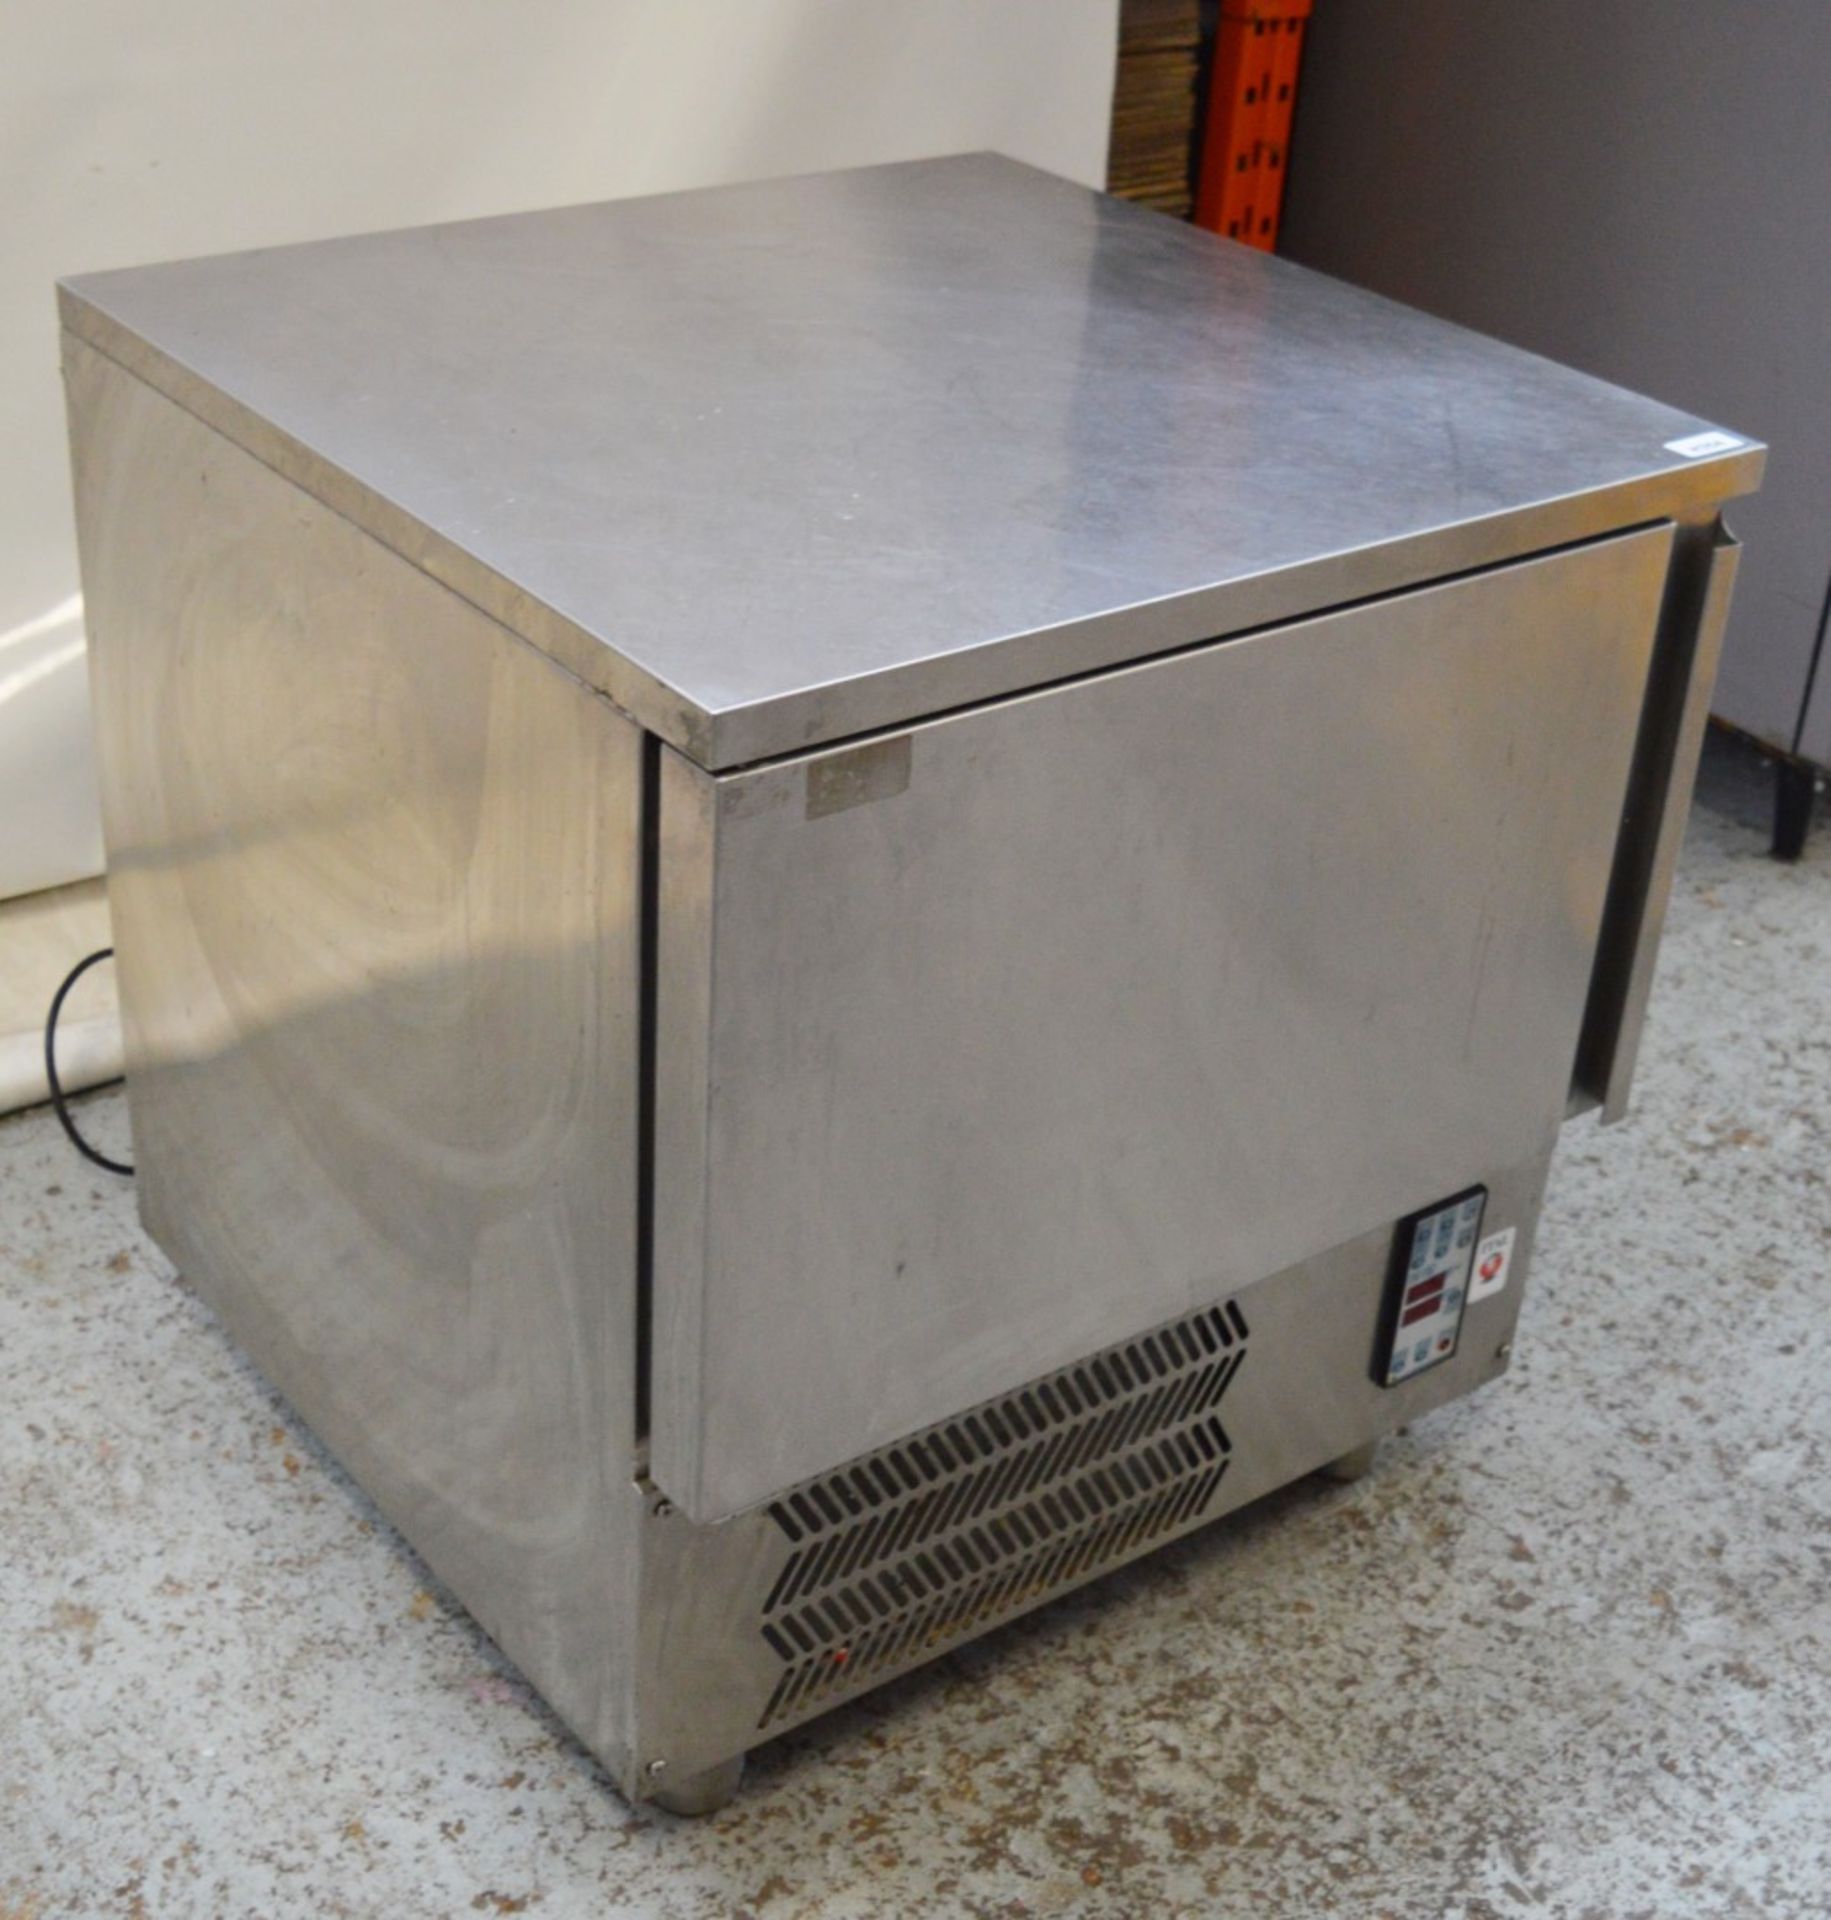 1 x Ital Compact Undercounter Blast Chiller - Stainless Steel - H82 x W75.5 x D74 cms - CL232 - - Image 3 of 7